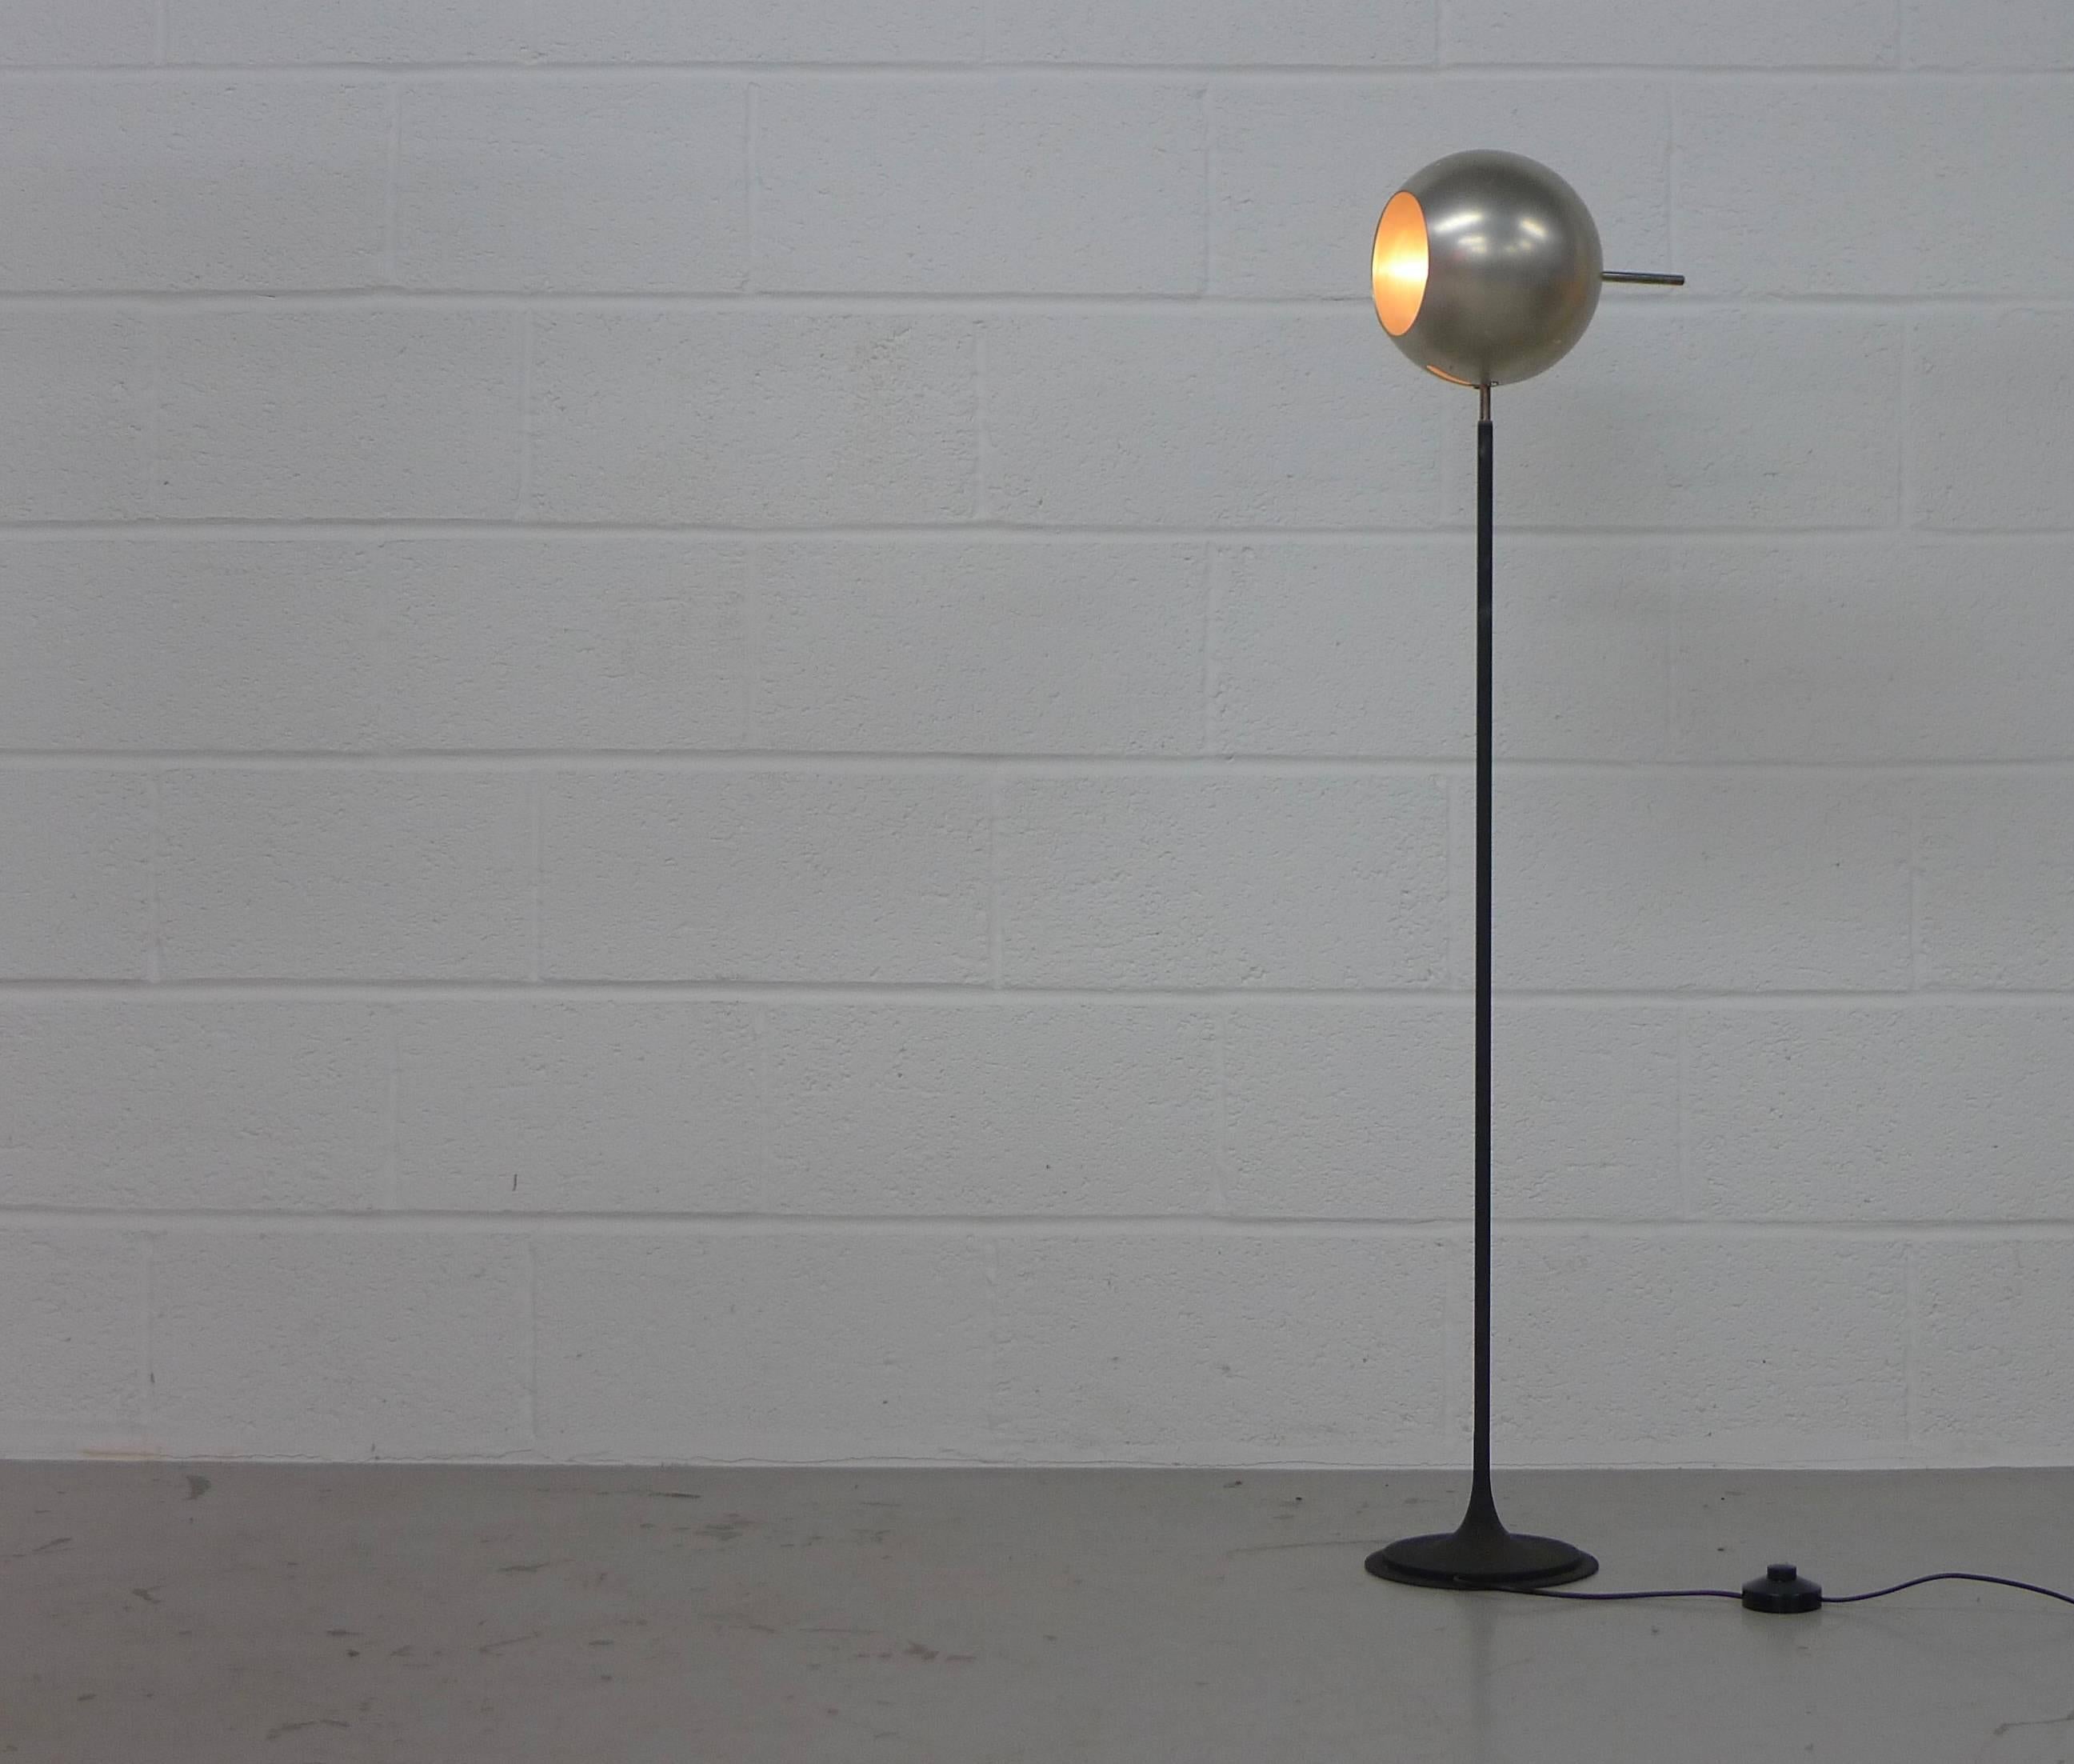 Gino Sarfatti for Arteluce, Italy, 1962. A polished aluminium and enamelled steel floor lamp model no. 1082 N.